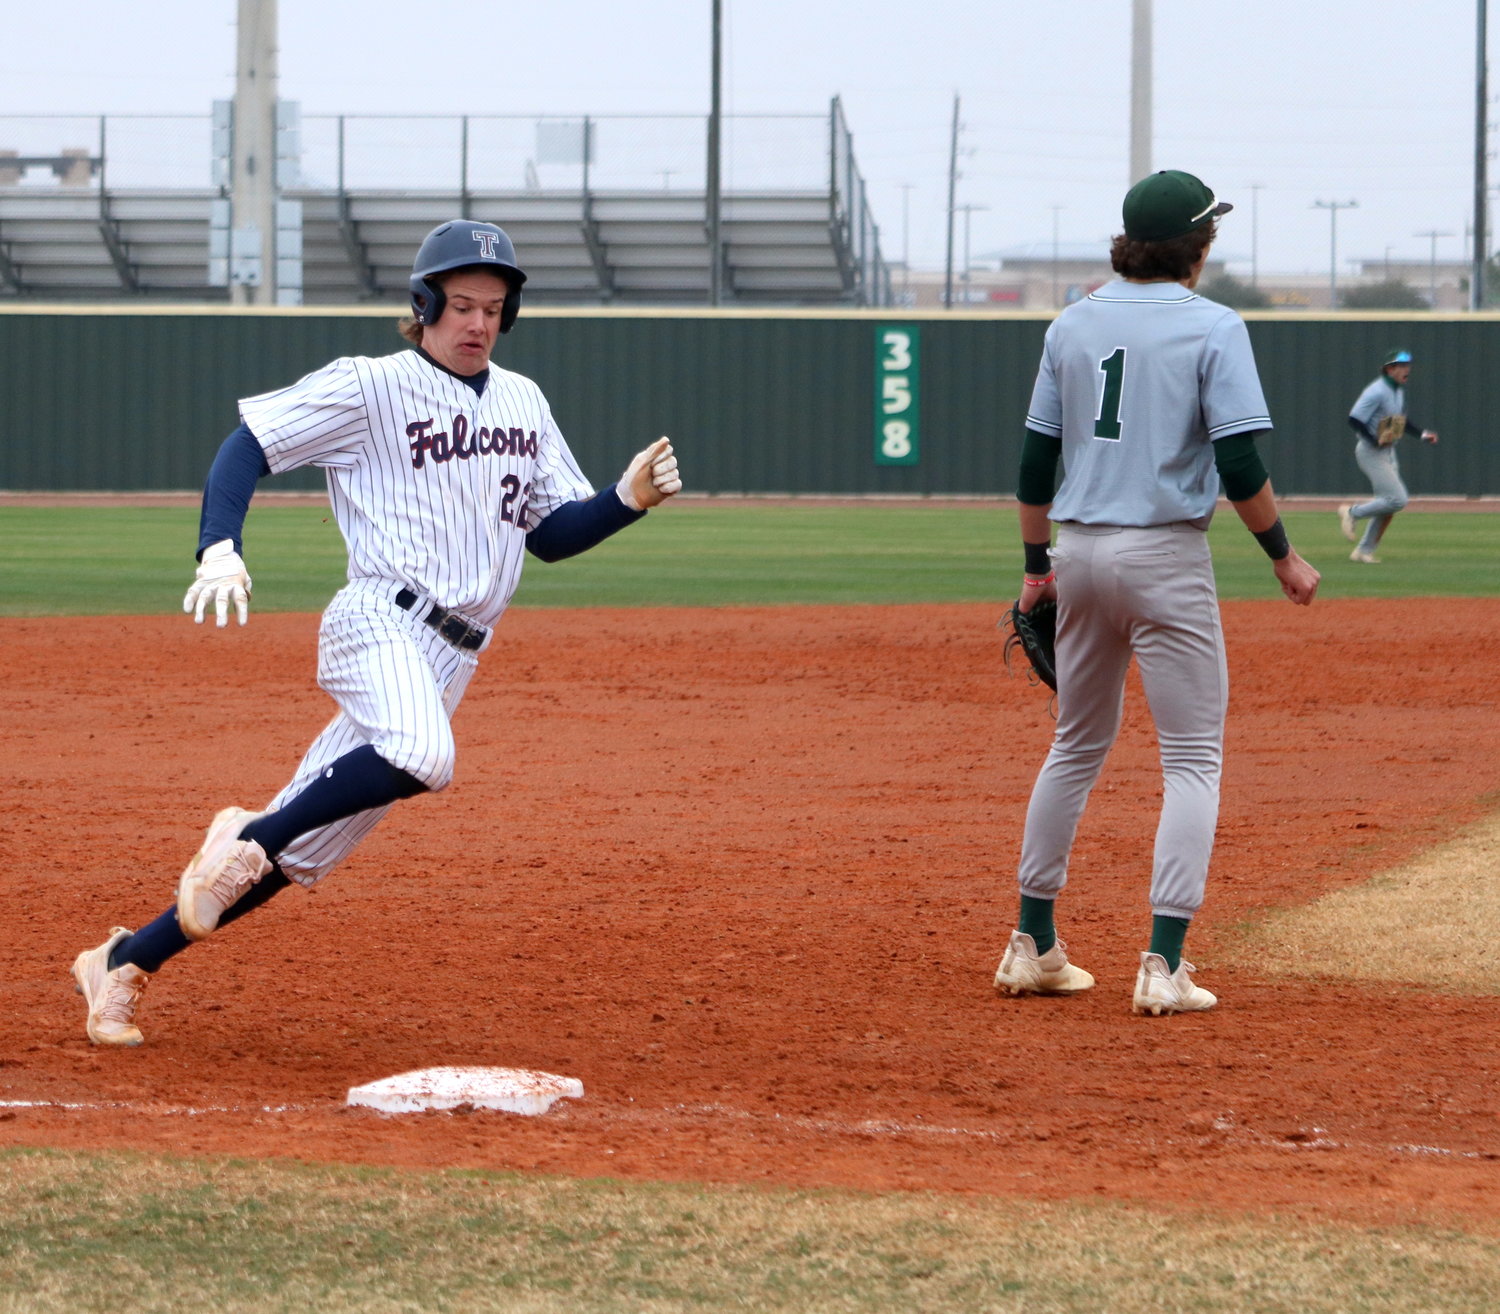 Jack Little rounds third base during Thursday’s game between Tompkins and San Antonio Reagan at the Tompkins baseball field.